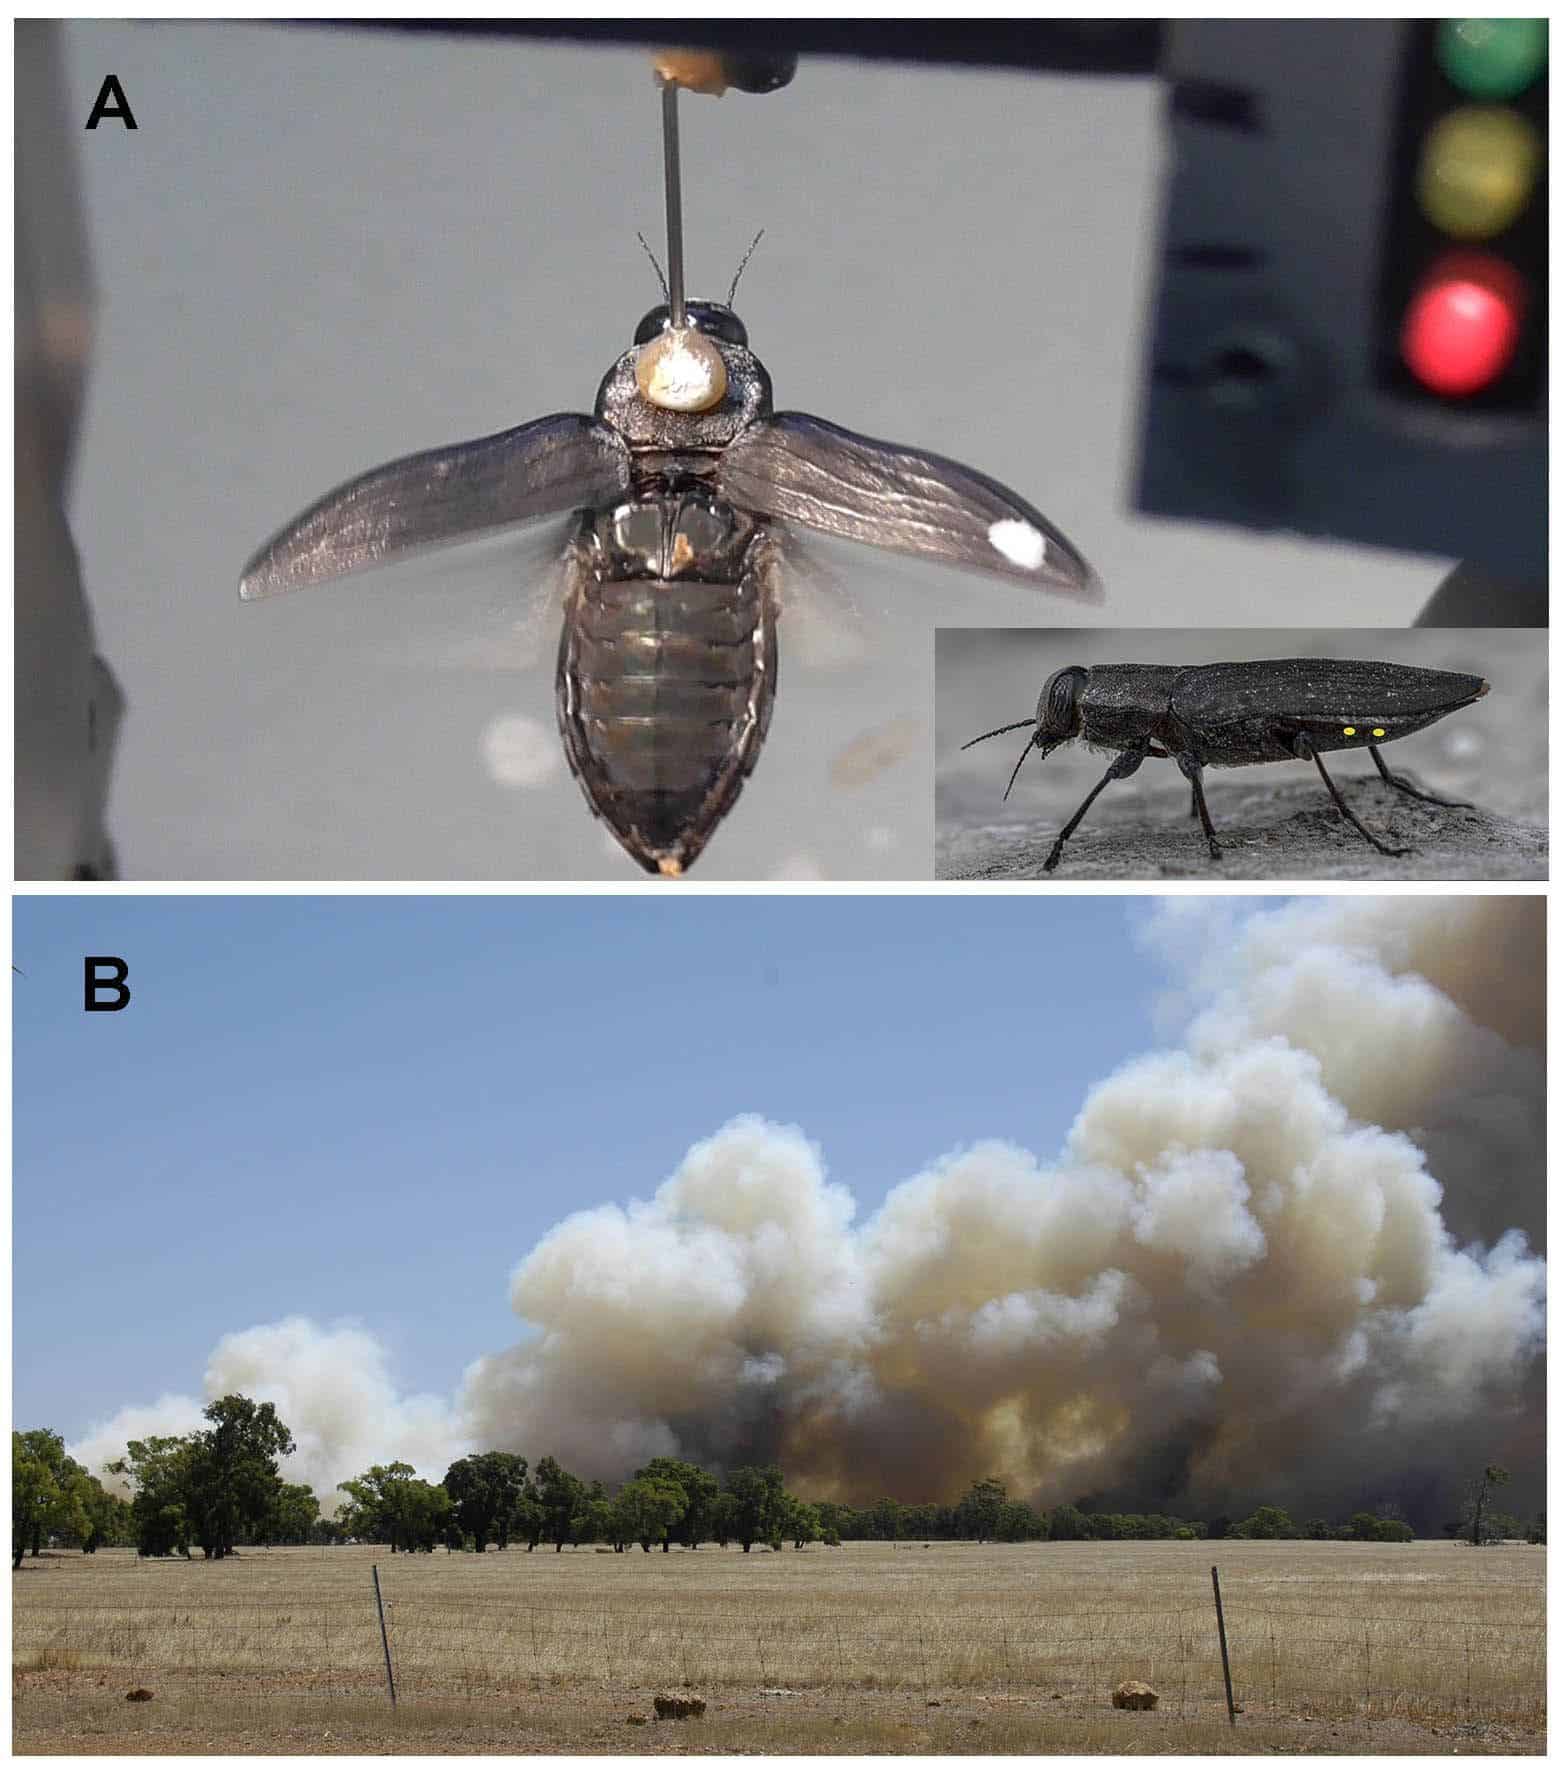 (A) The way that the beetles was fixed during the experiments (B) An Image of smoke that was shown to the beetle. Image credits: Helmut Schmitz/Uni Bonn.